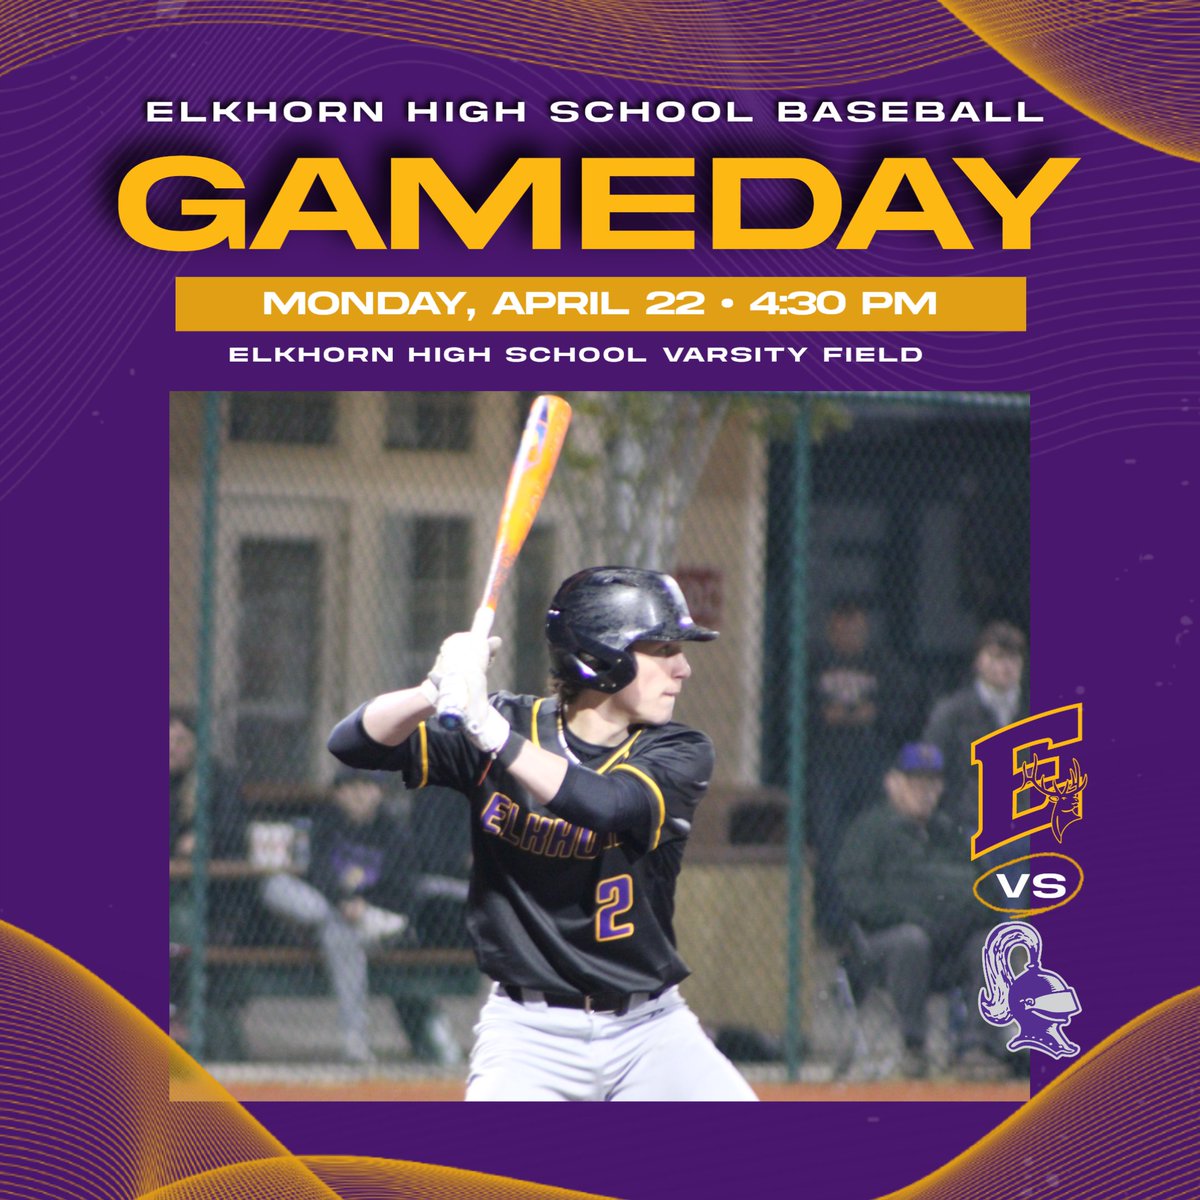 Game Day!  The Elks take on Beloit Memorial in a conference matchup tonight at home.  Come on out and support these guys!  @EAHS_Baseball #1Herd #goelks